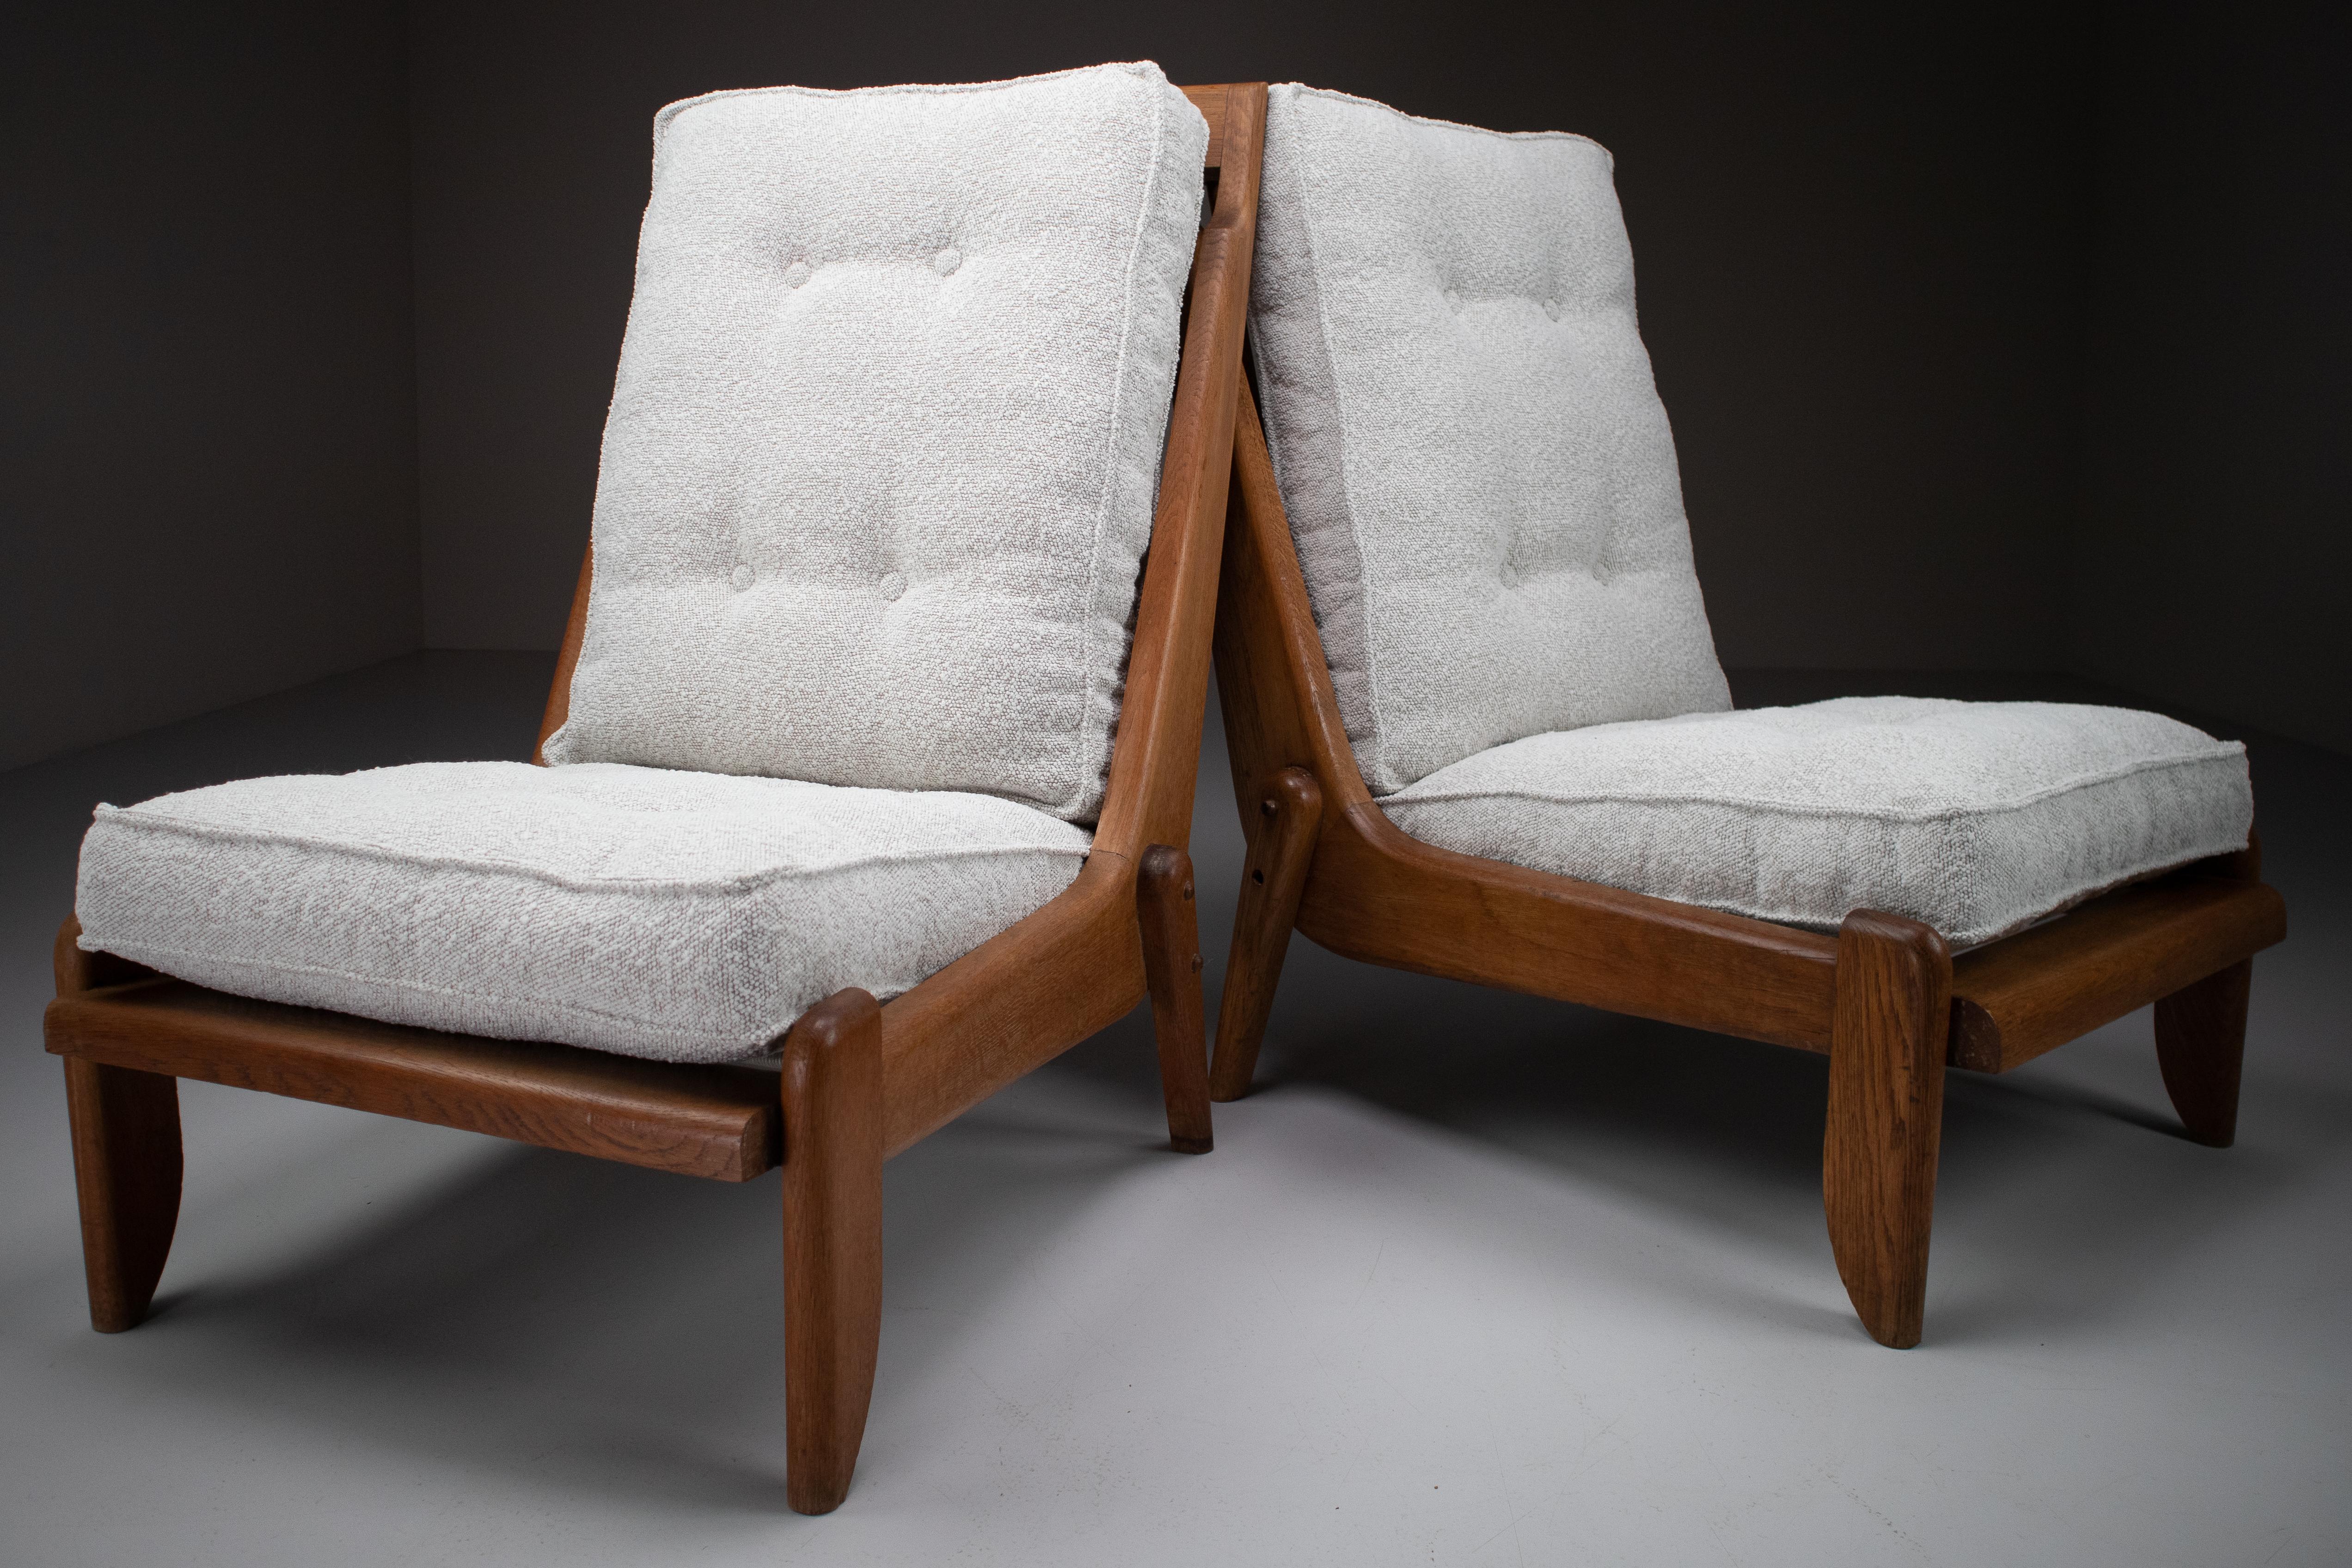 Guillerme & Chambron, pair of two lounge chairs in solid blond oak and reupholstered in bouclé fabric. 

Pair of two original midcentury lounge chairs manufactured and designed by Guillerme & Chambron in France, 1950s. Made of solid blond oak and